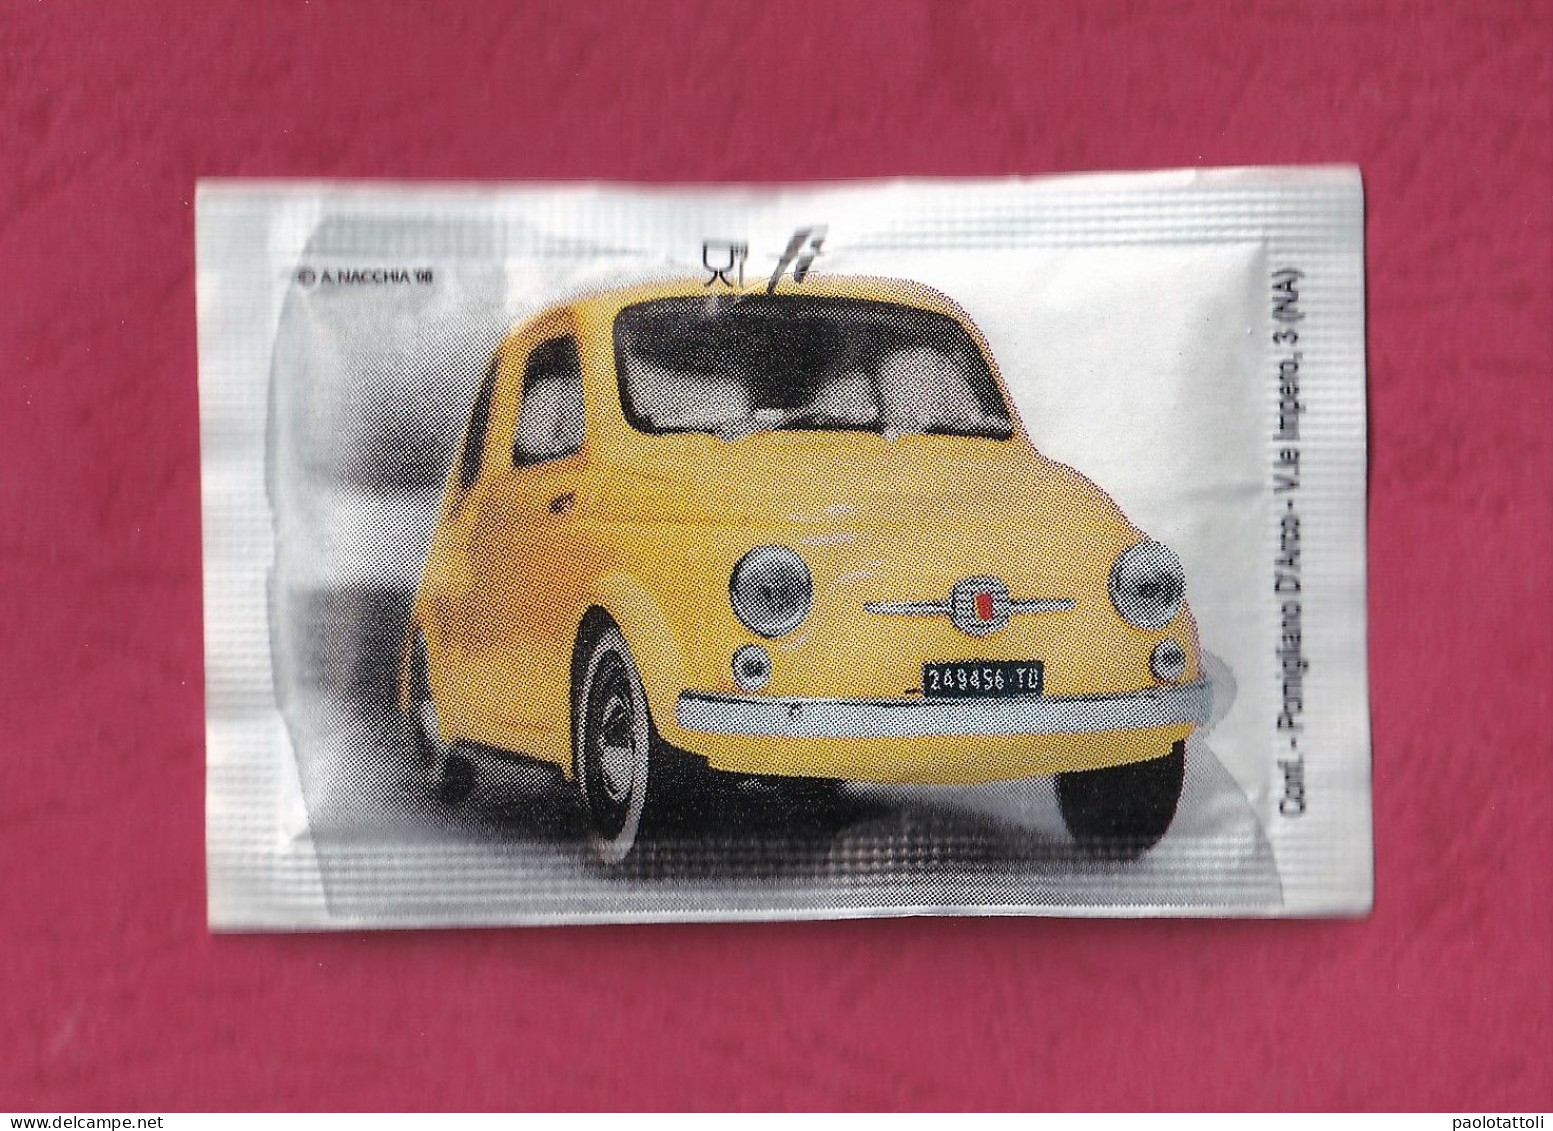 Bustina Zucchero Piena, Full Sugar Pack- Auto-Car FIAT 500. Packed At Pomigliano D'Arco-NA- - Suiker